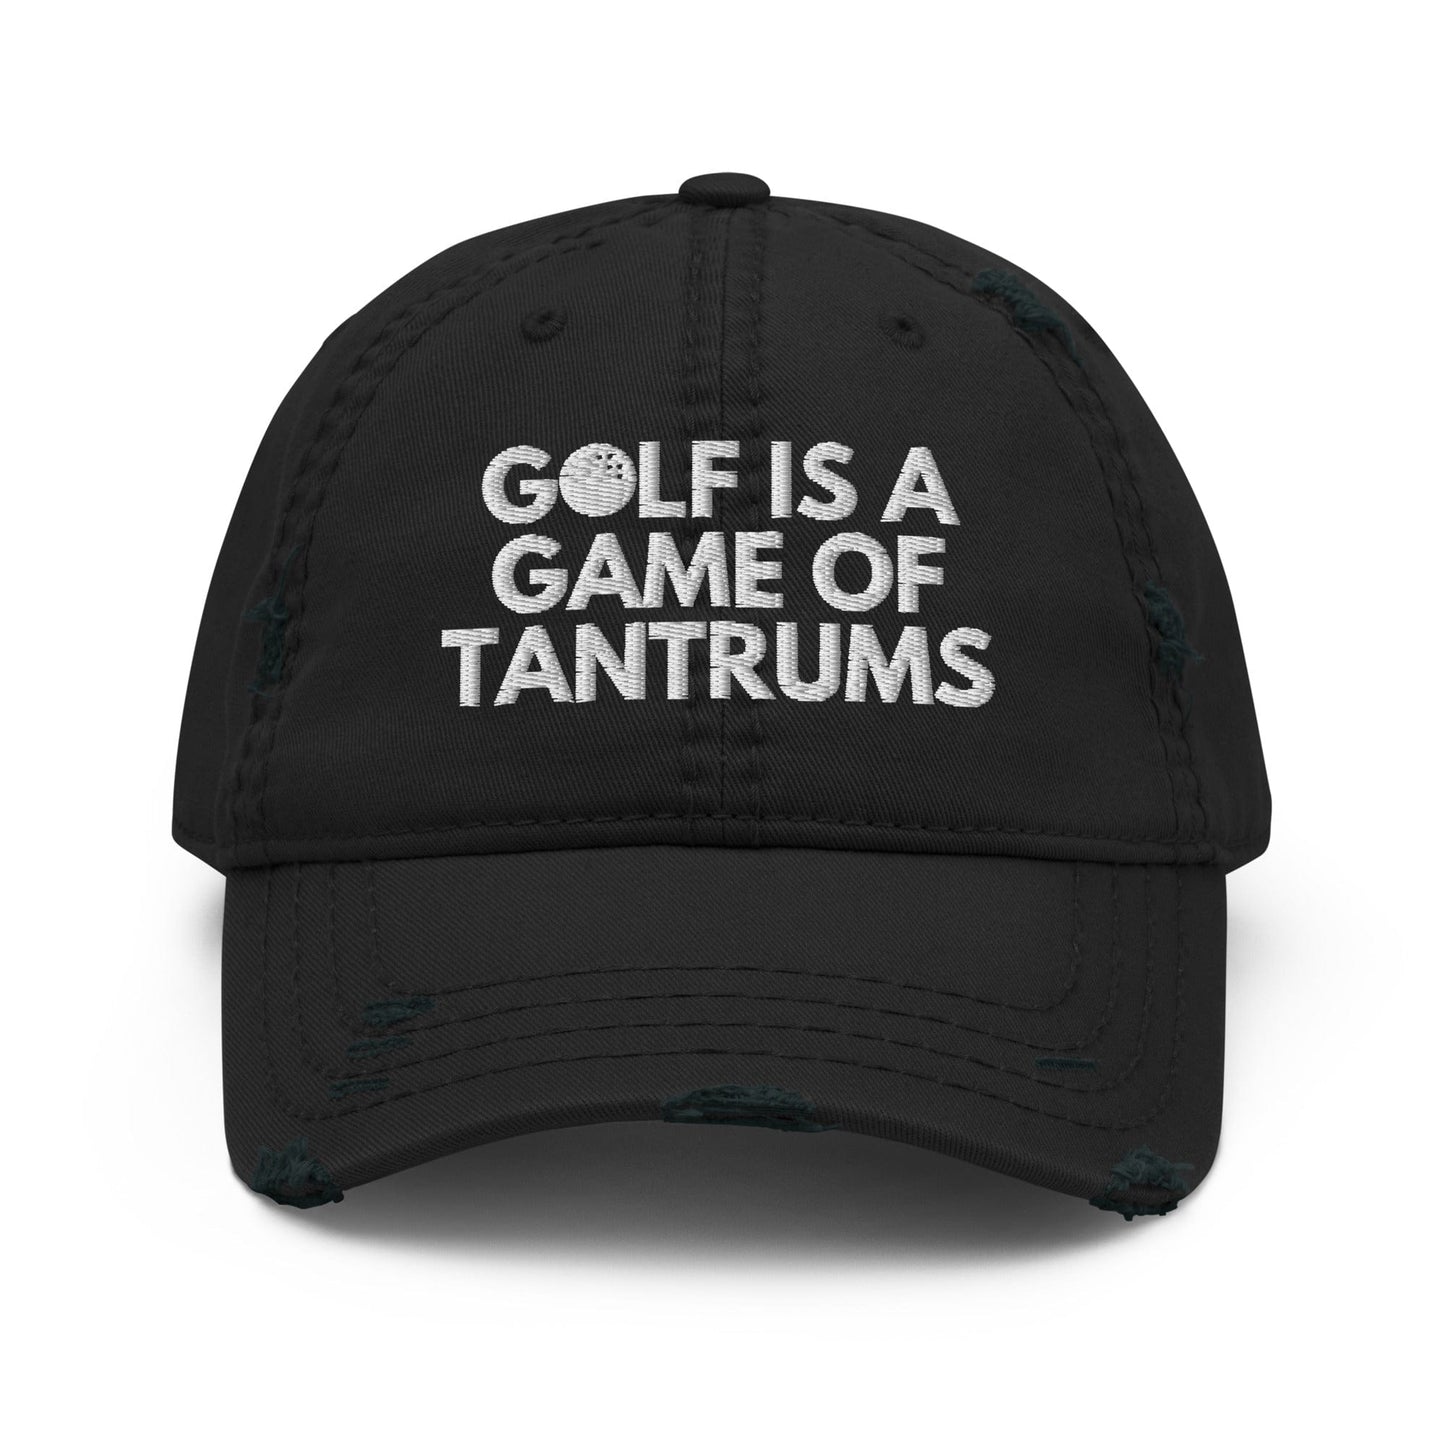 Funny Golfer Gifts  Distressed Cap Black Golf Is A Game Of Tantrums Hat Distressed Hat